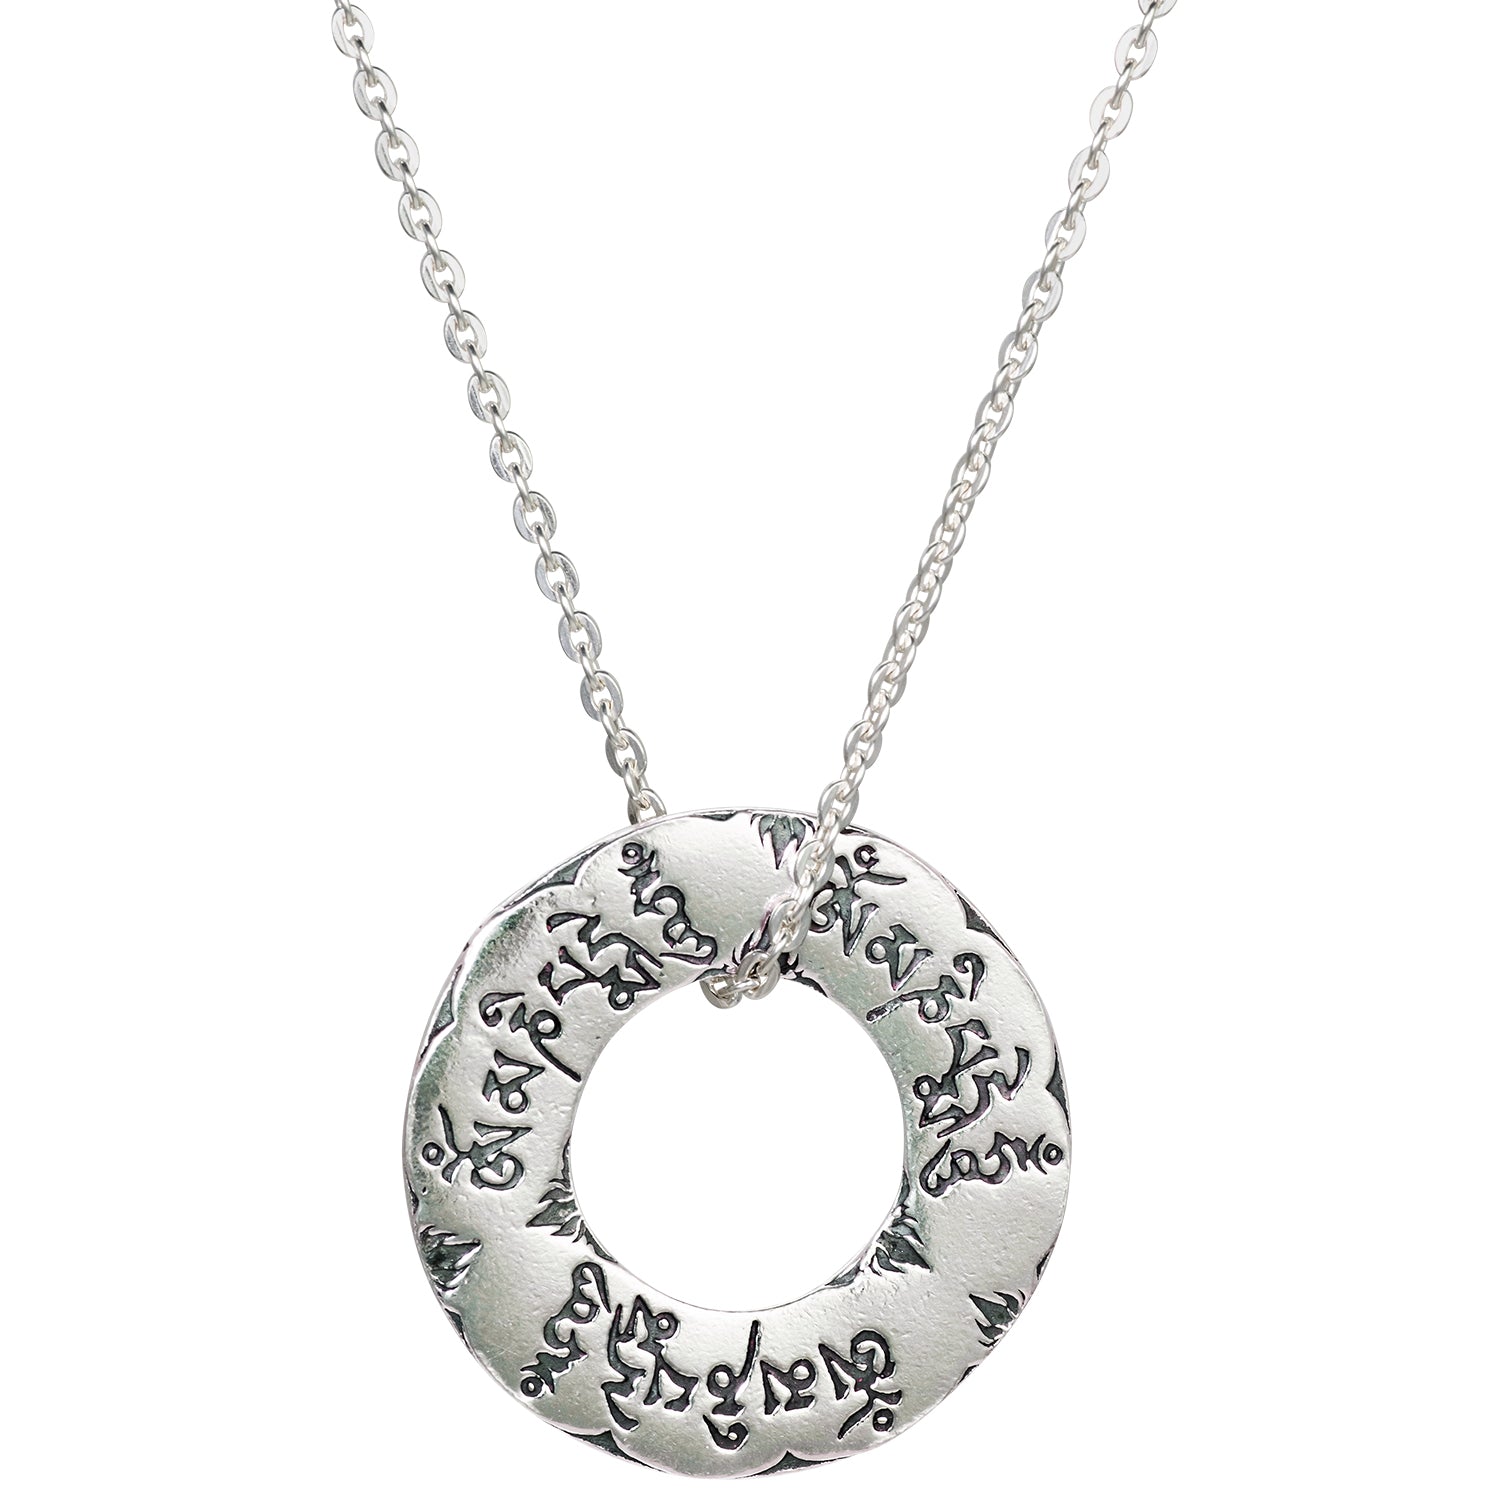 Om Mani Padme Hum Mantra necklace by ETERNAL BLISS - Spiritual Jewellery